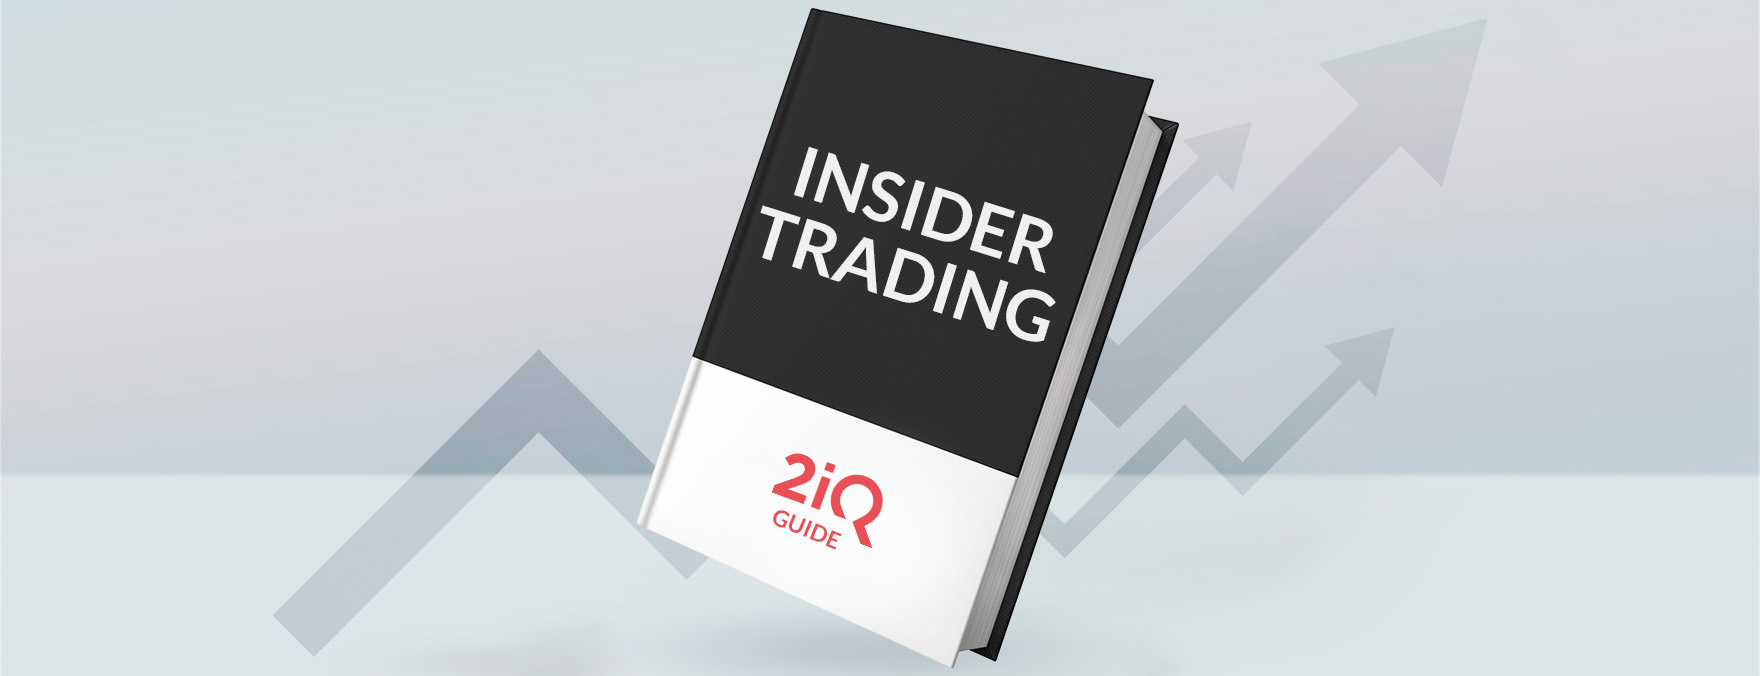 The image shows a book titled Insider Trading with the logo of 2iQ on it.